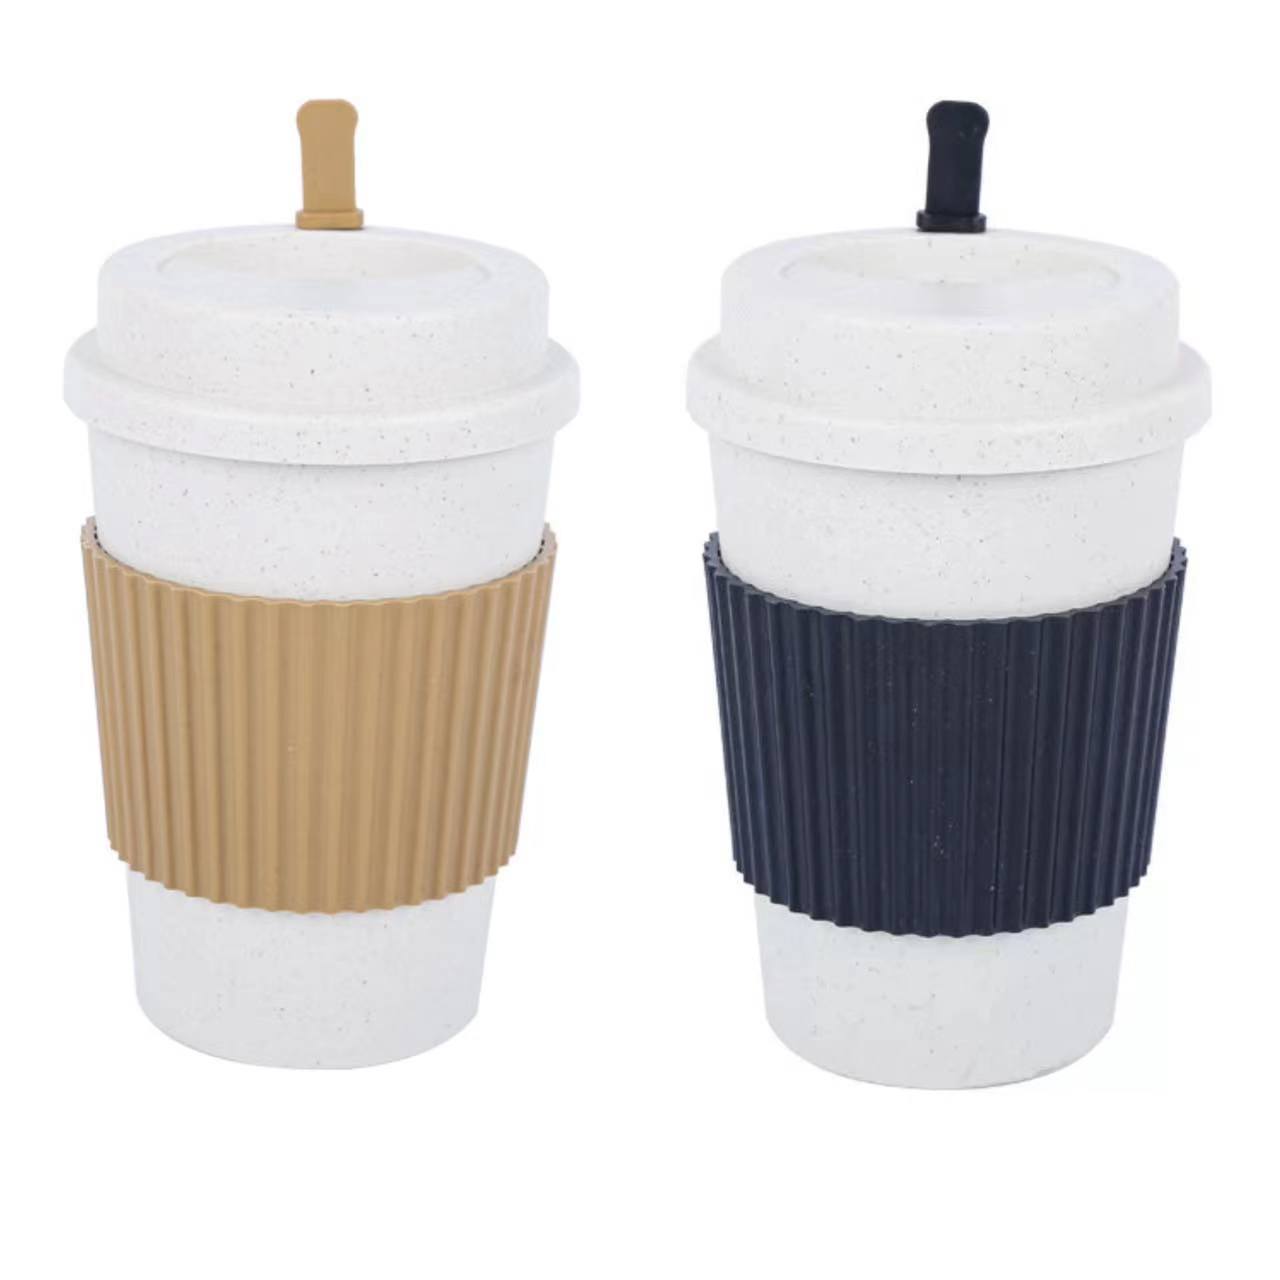 European style coffee cup with high aesthetic value, portable mug, student portable drinking cup, car mounted water cup with lid, beverage cup